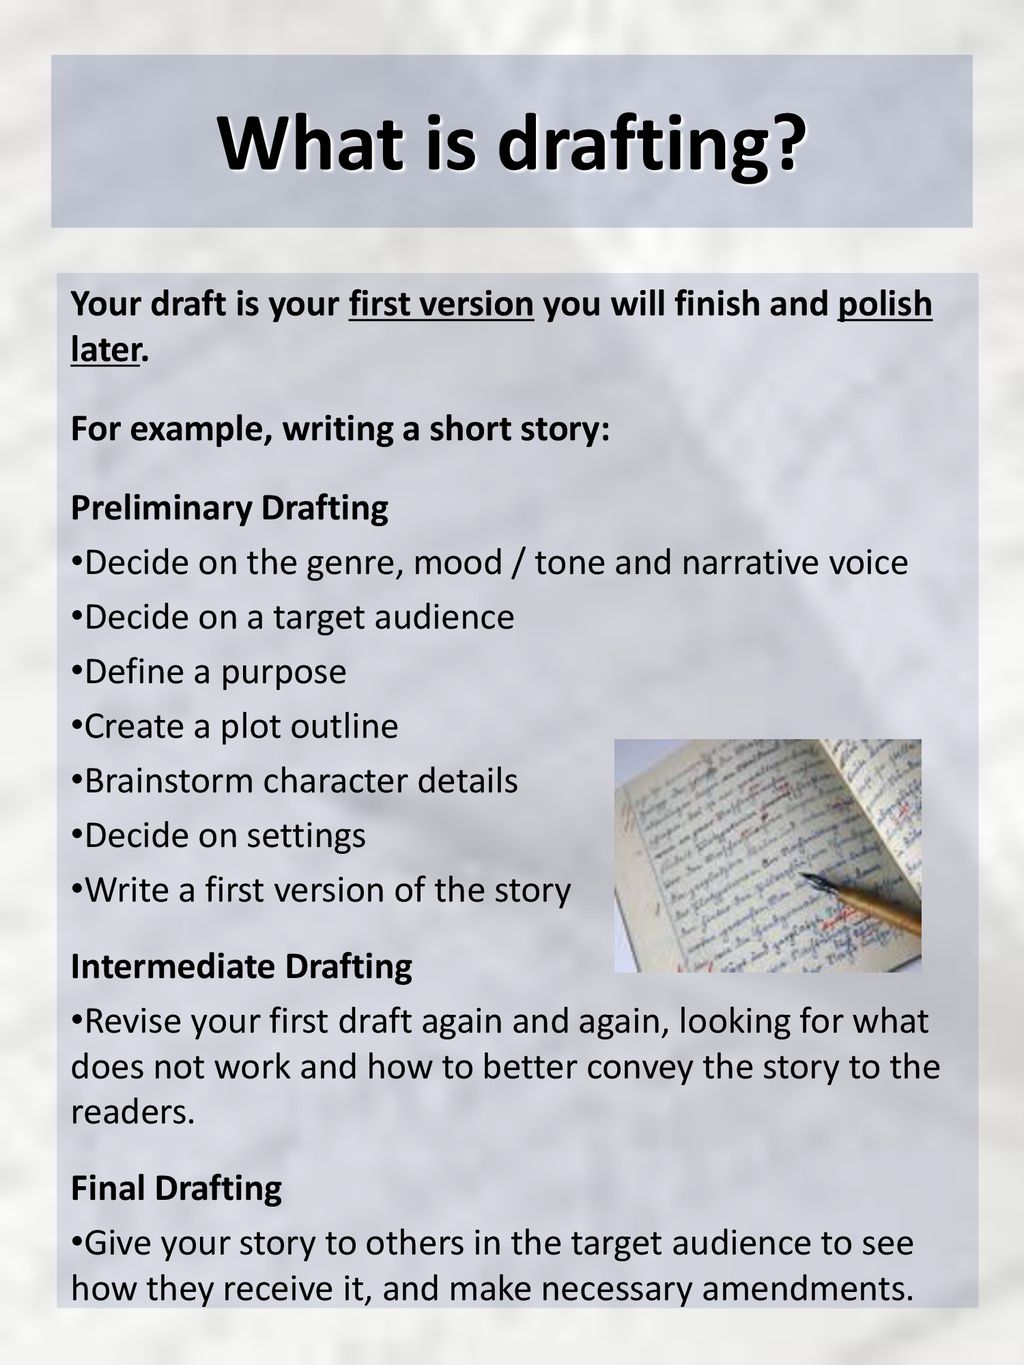 What is drafting? Your draft is your first version you will finish